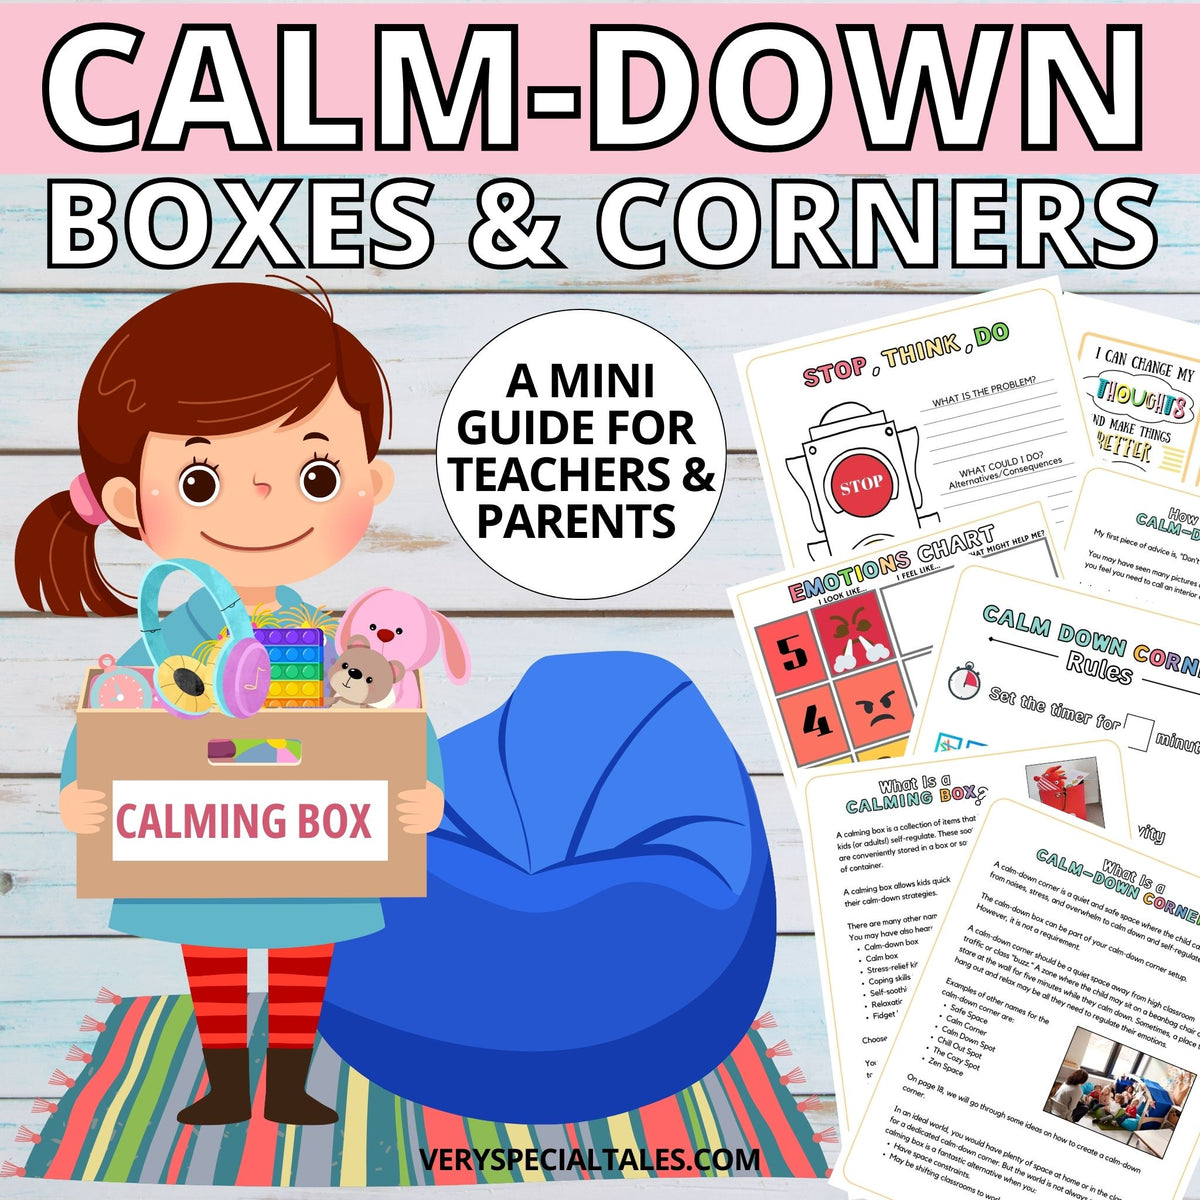 A playful illustration of a child standing in her living room, holding a calming box full of her favourite things. Worksheets from the Calming Box/Calm-Down Corner Easy Guide are displayed next to the illustration.